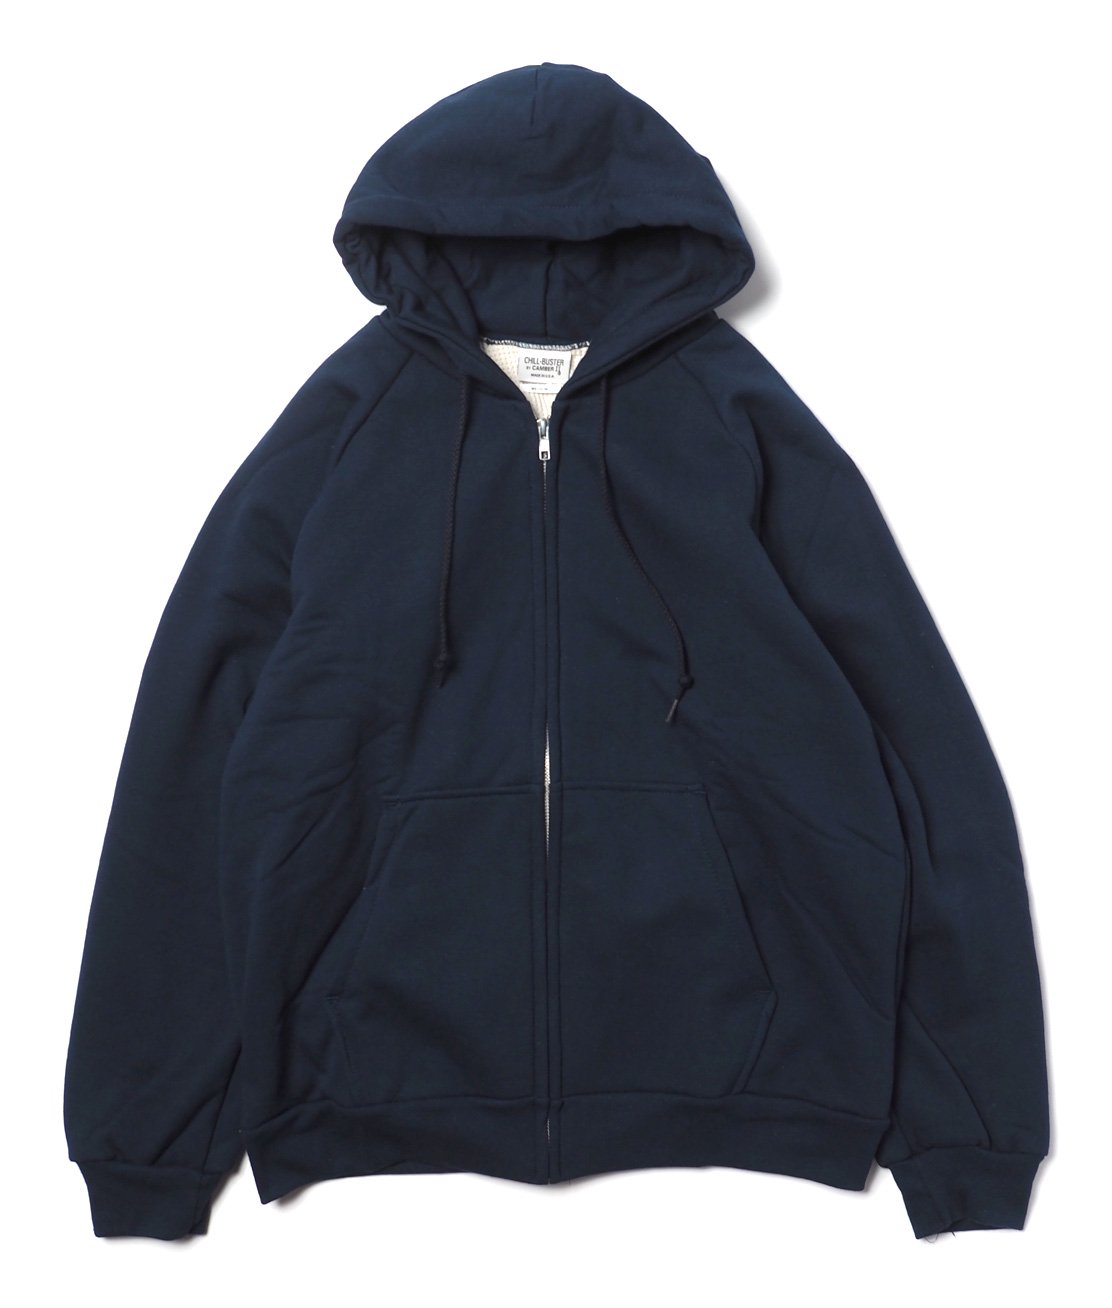 CAMBER】#531 ZIP HOODED CHILL BUSTER - NAVY ジップパーカー 厚手